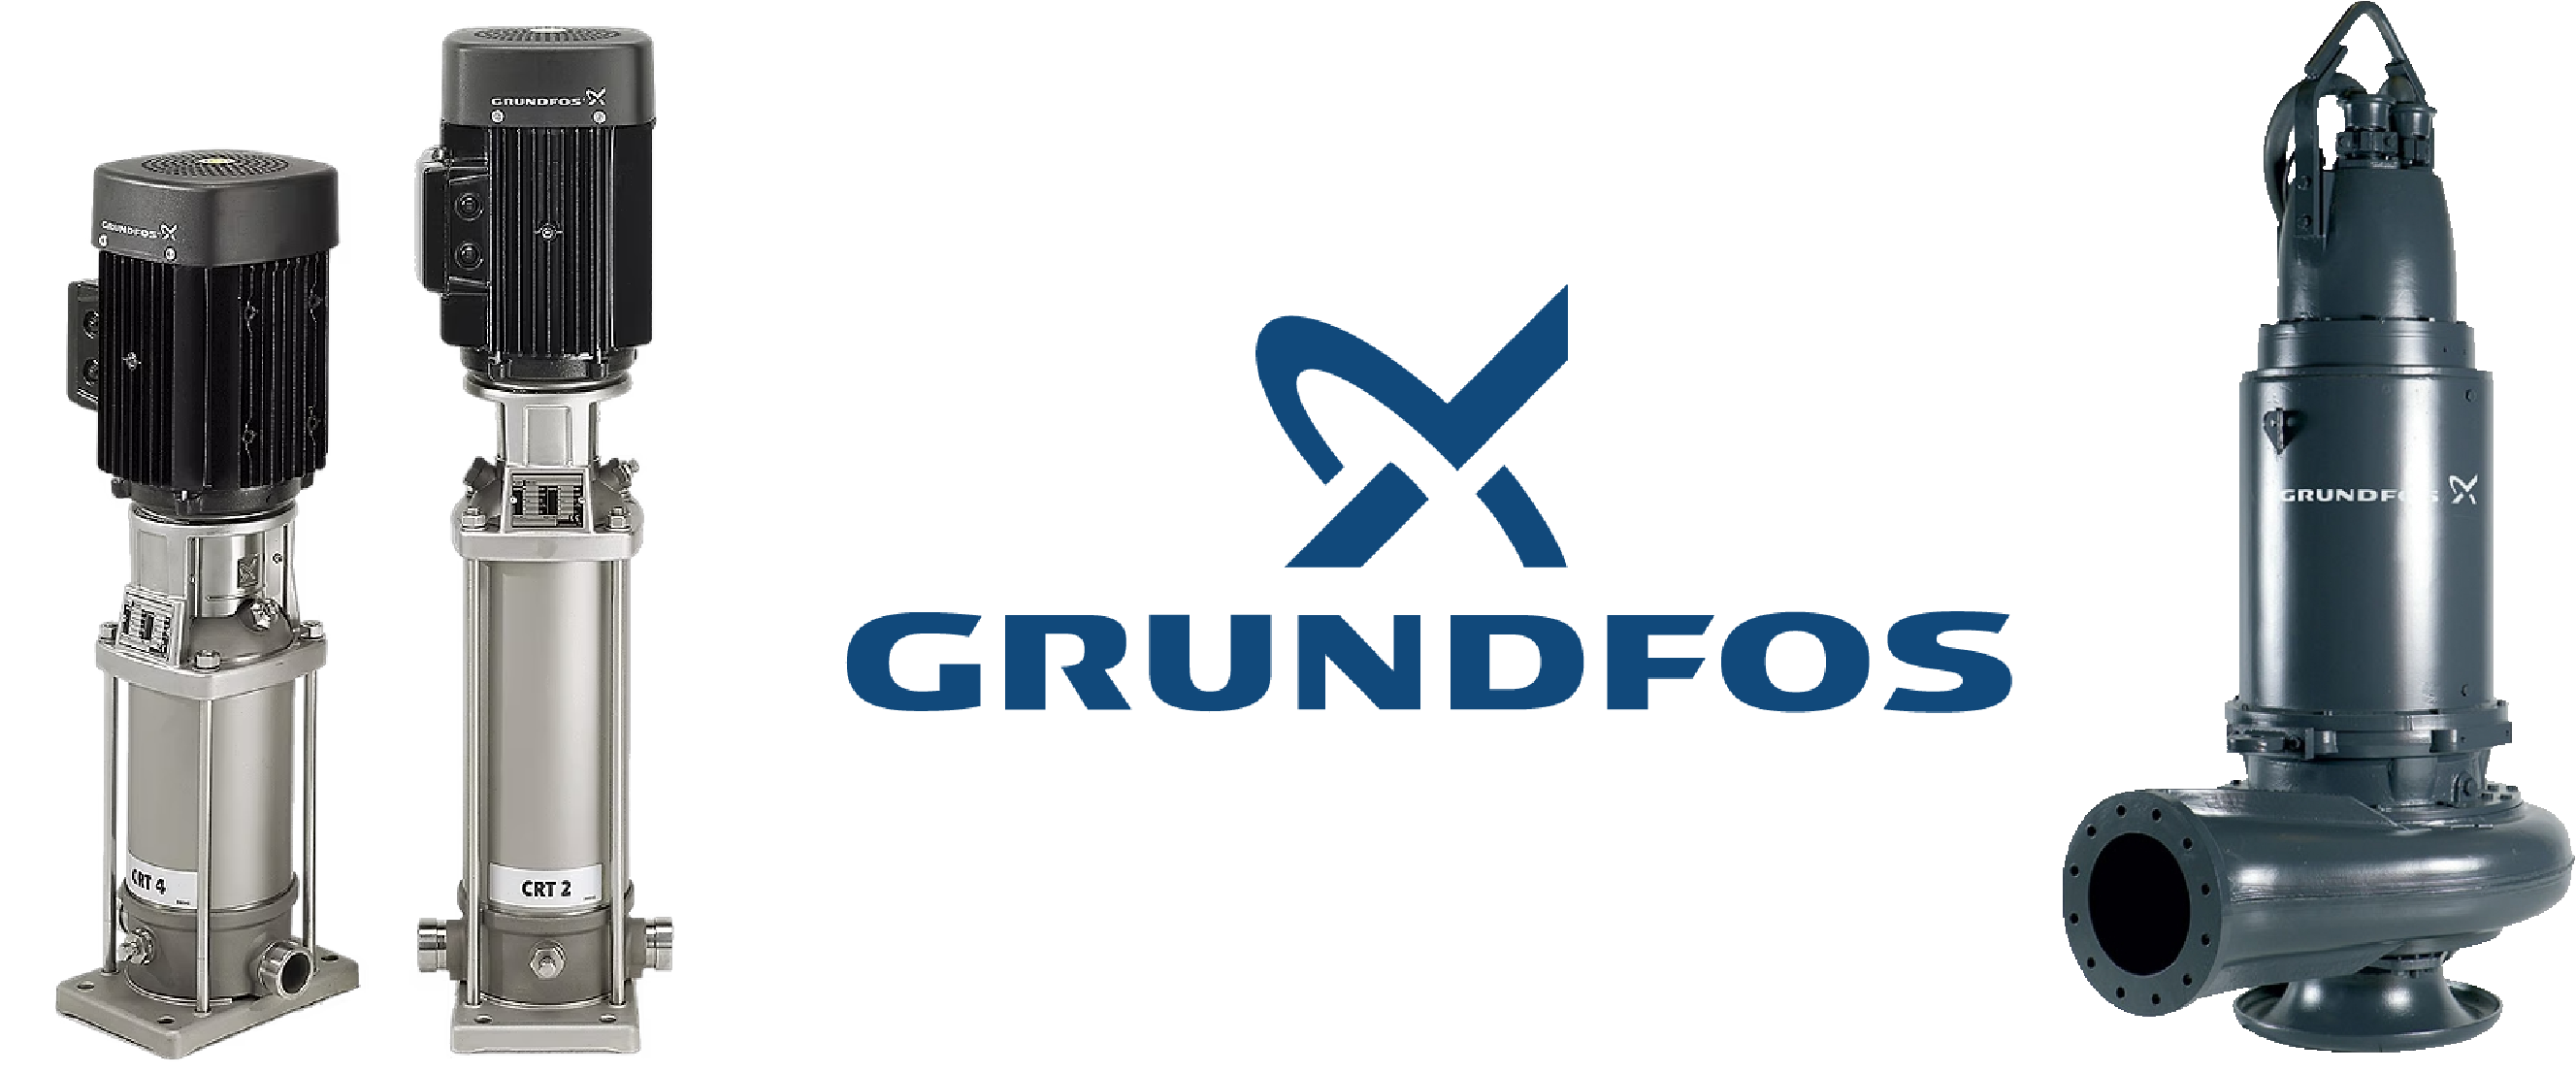 Grundfos Water Pumps for Industrial Applications